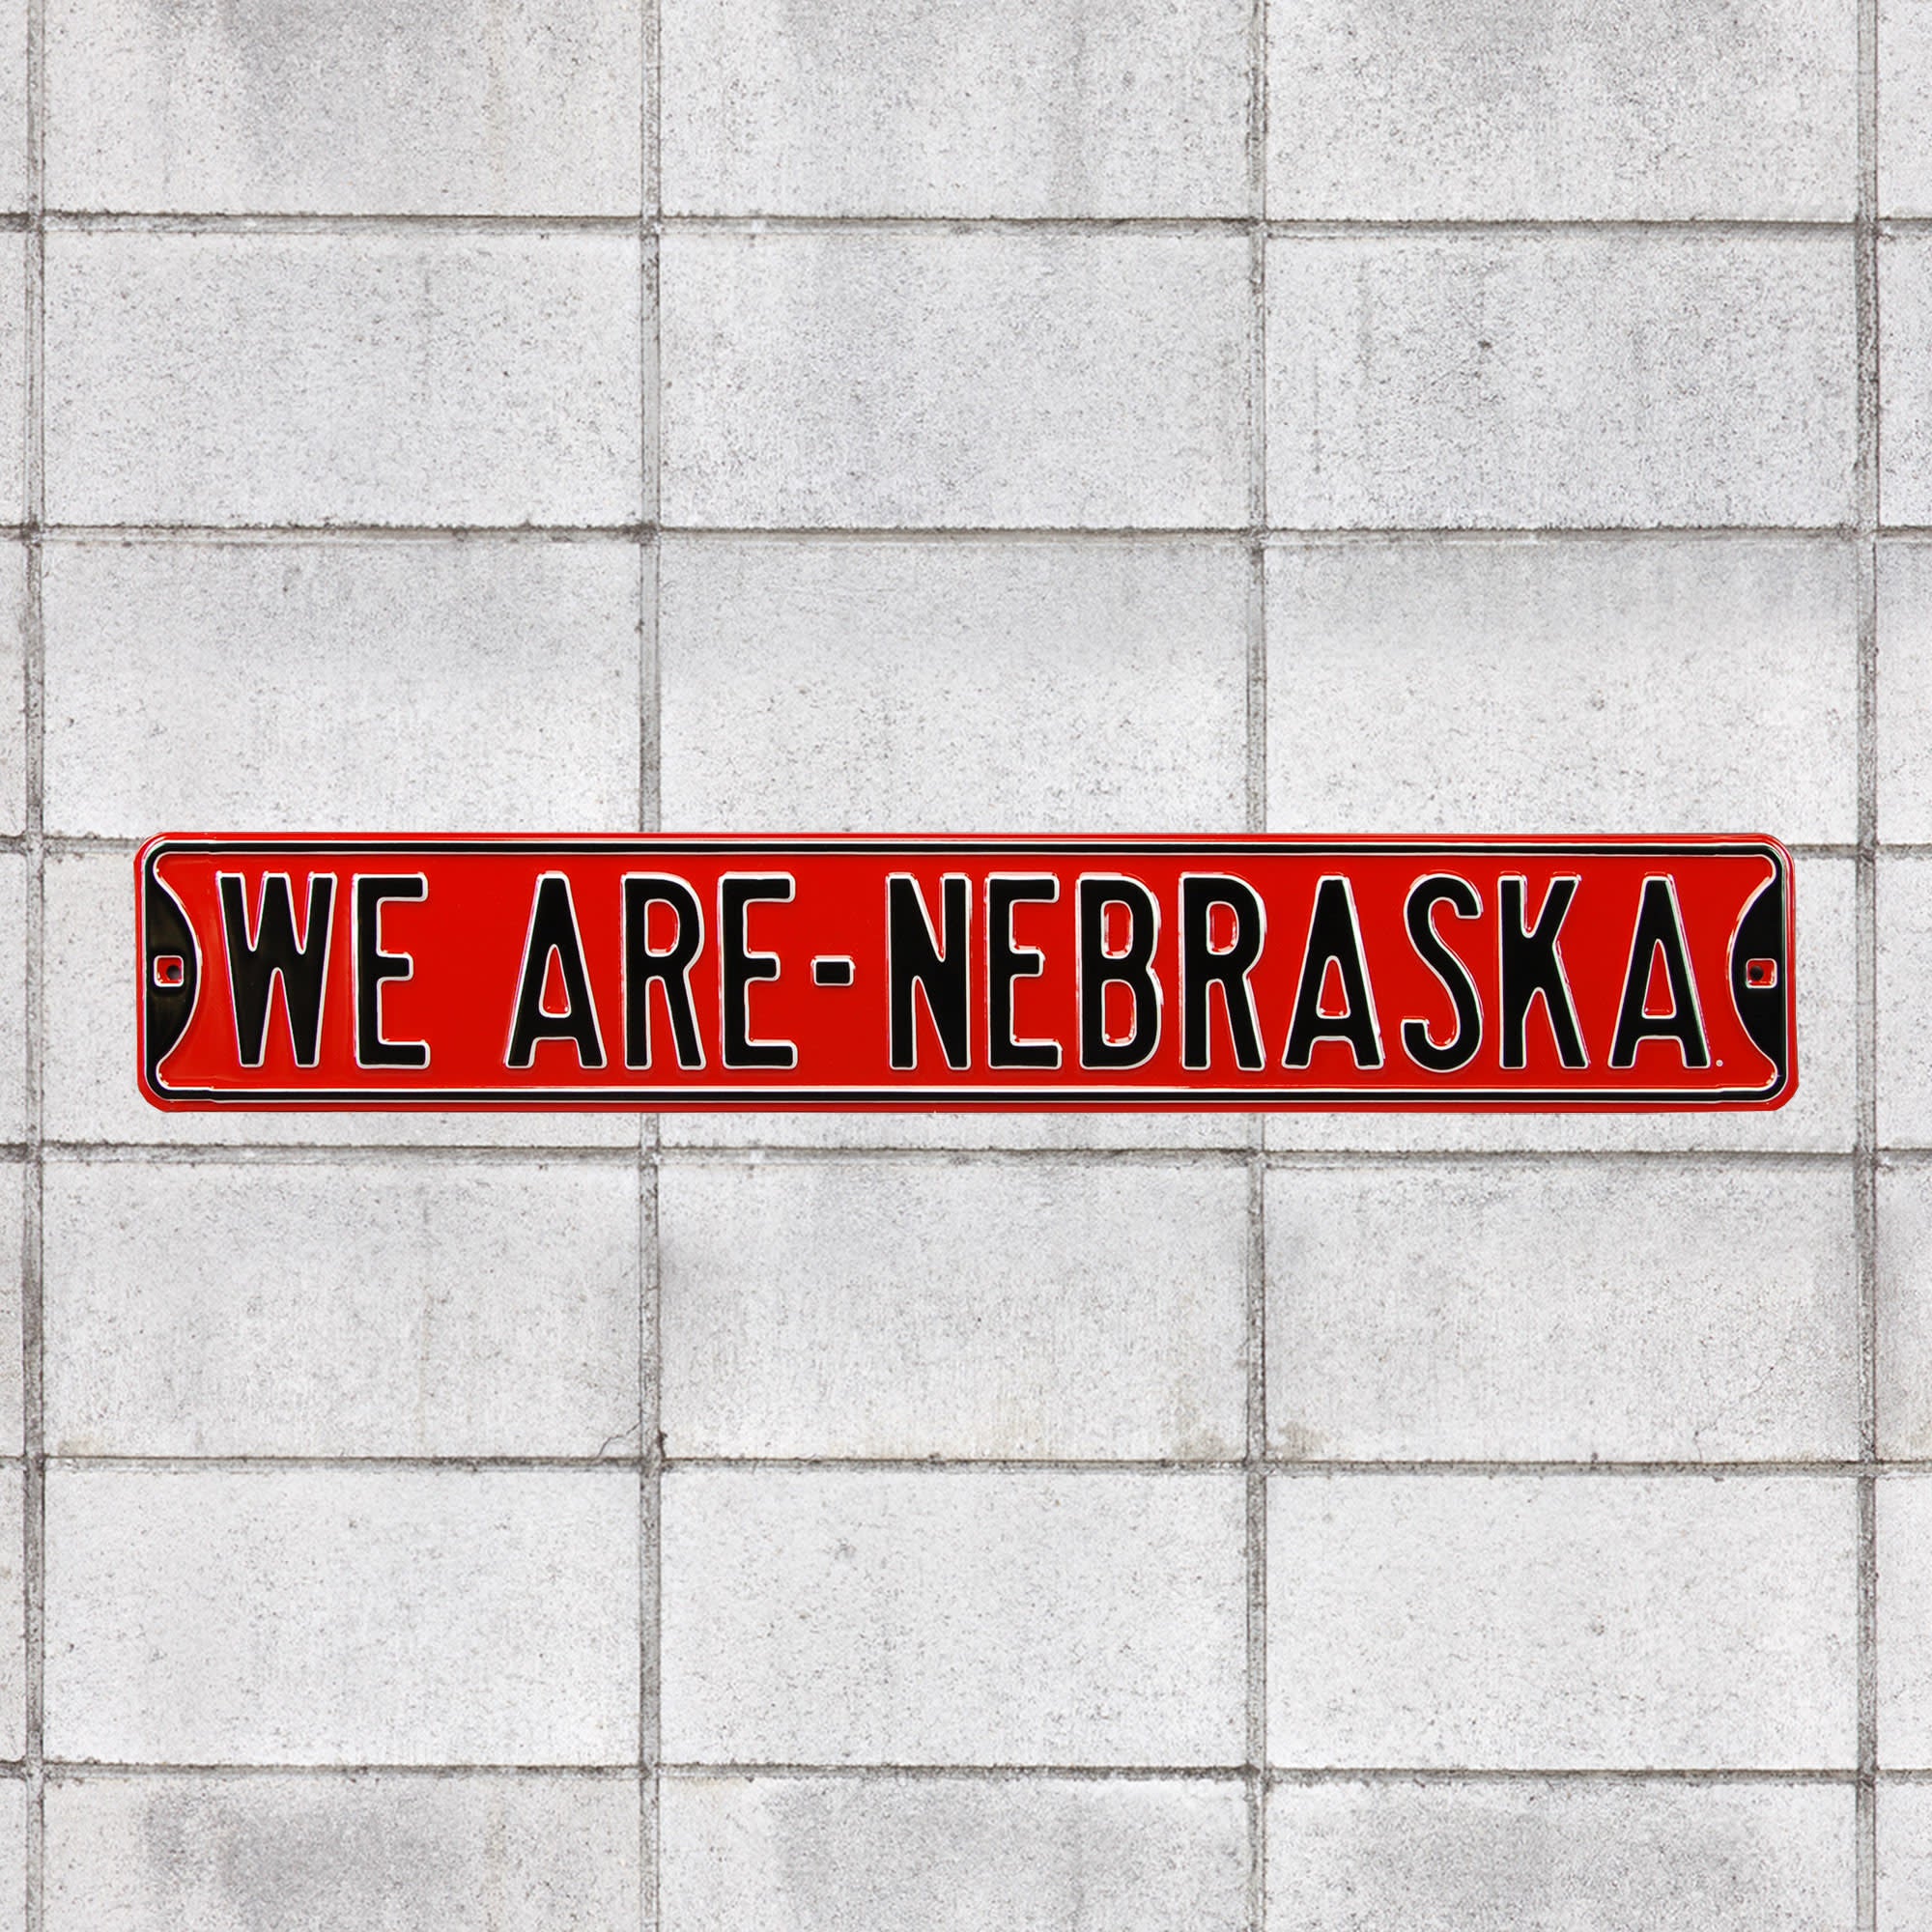 Nebraska Cornhuskers: We Are - Officially Licensed Metal Street Sign 36.0"W x 6.0"H by Fathead | 100% Steel